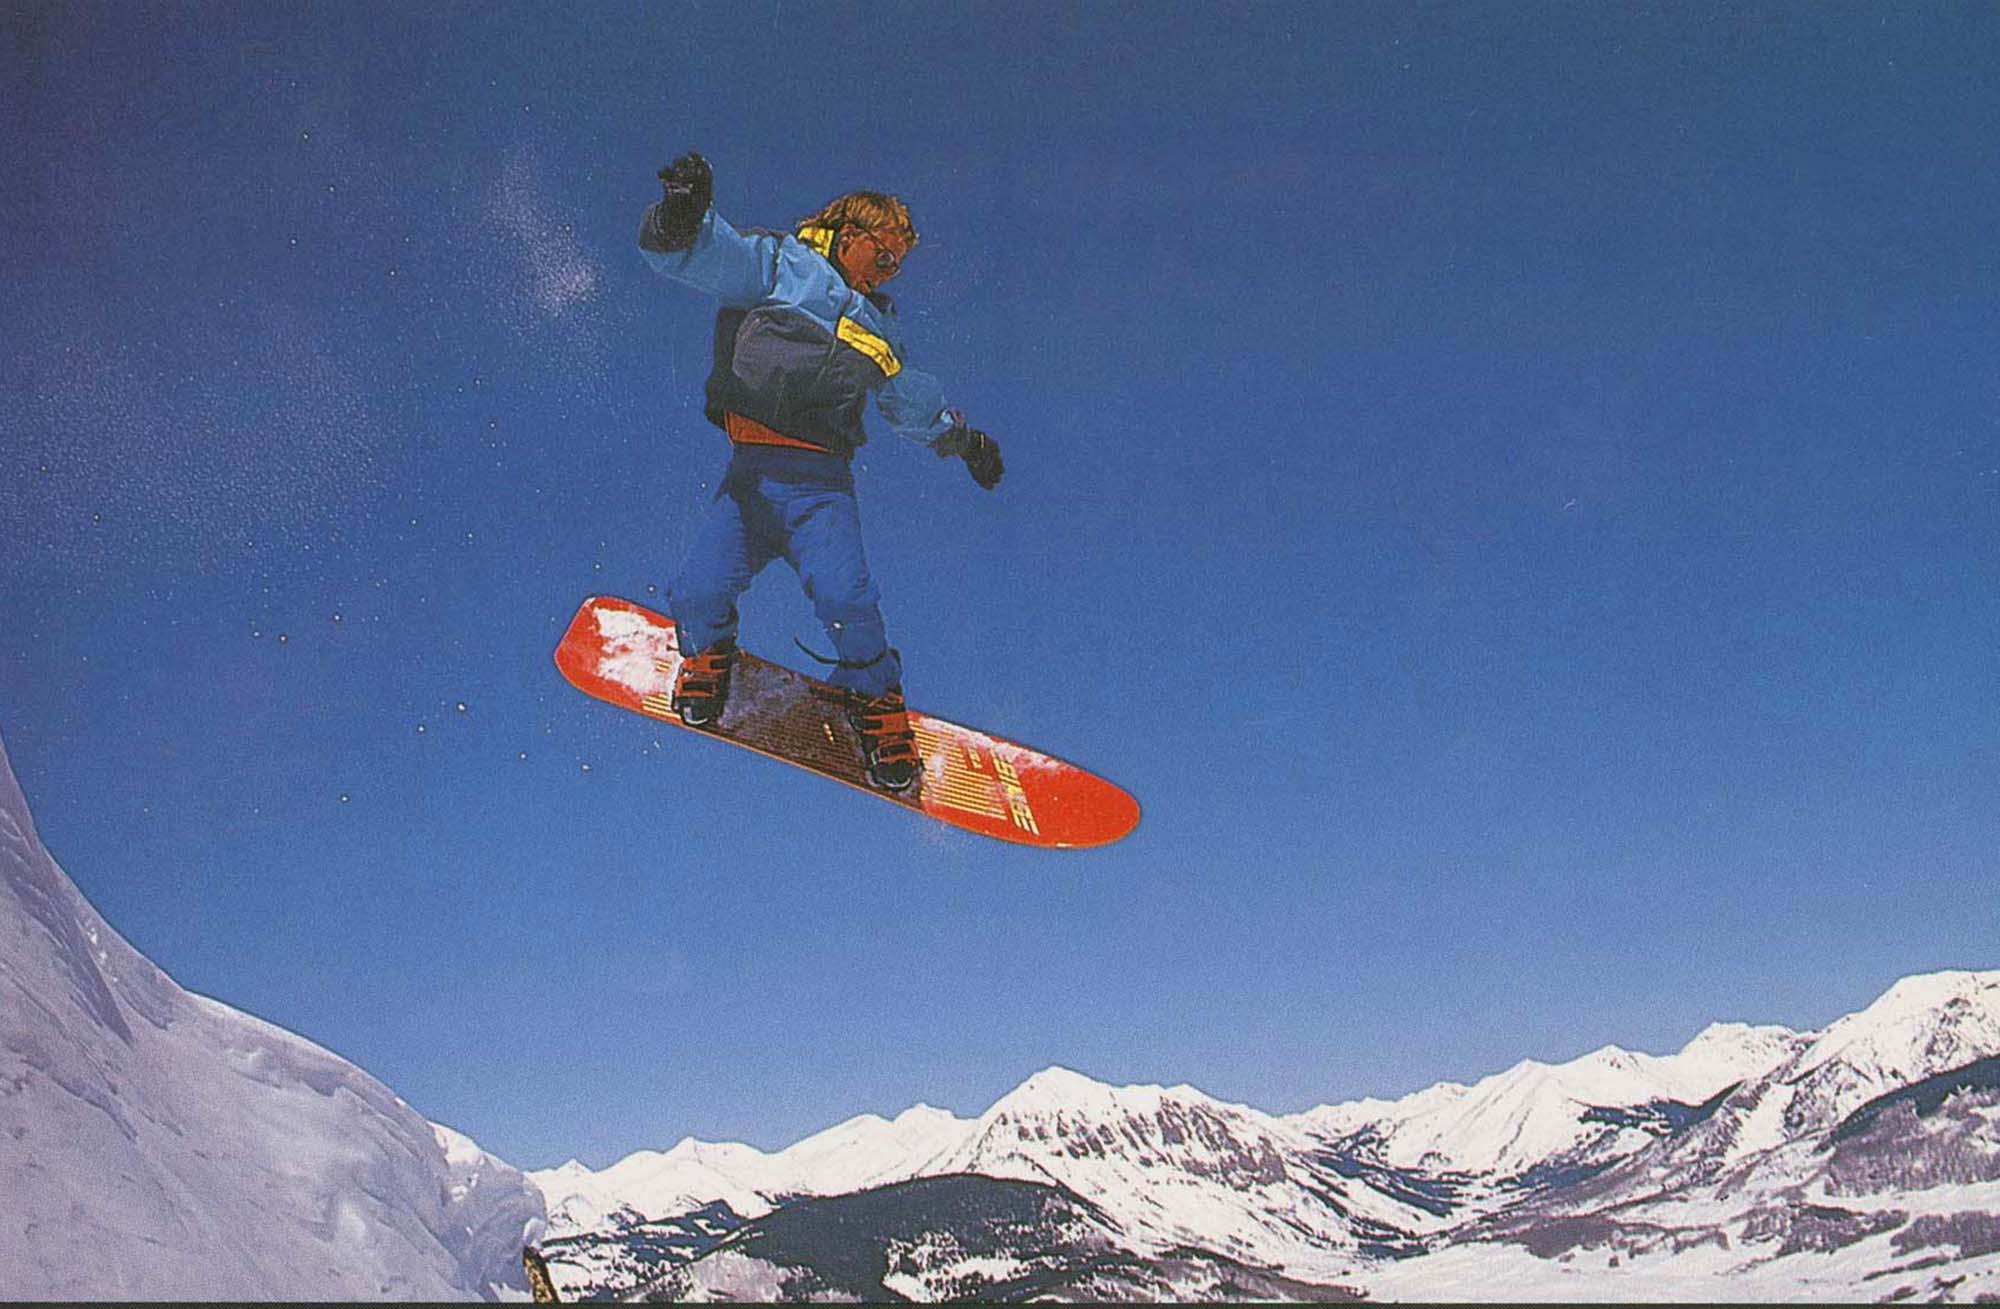 Snowboarder catching air on his snowboard, (Colo.)--1980s